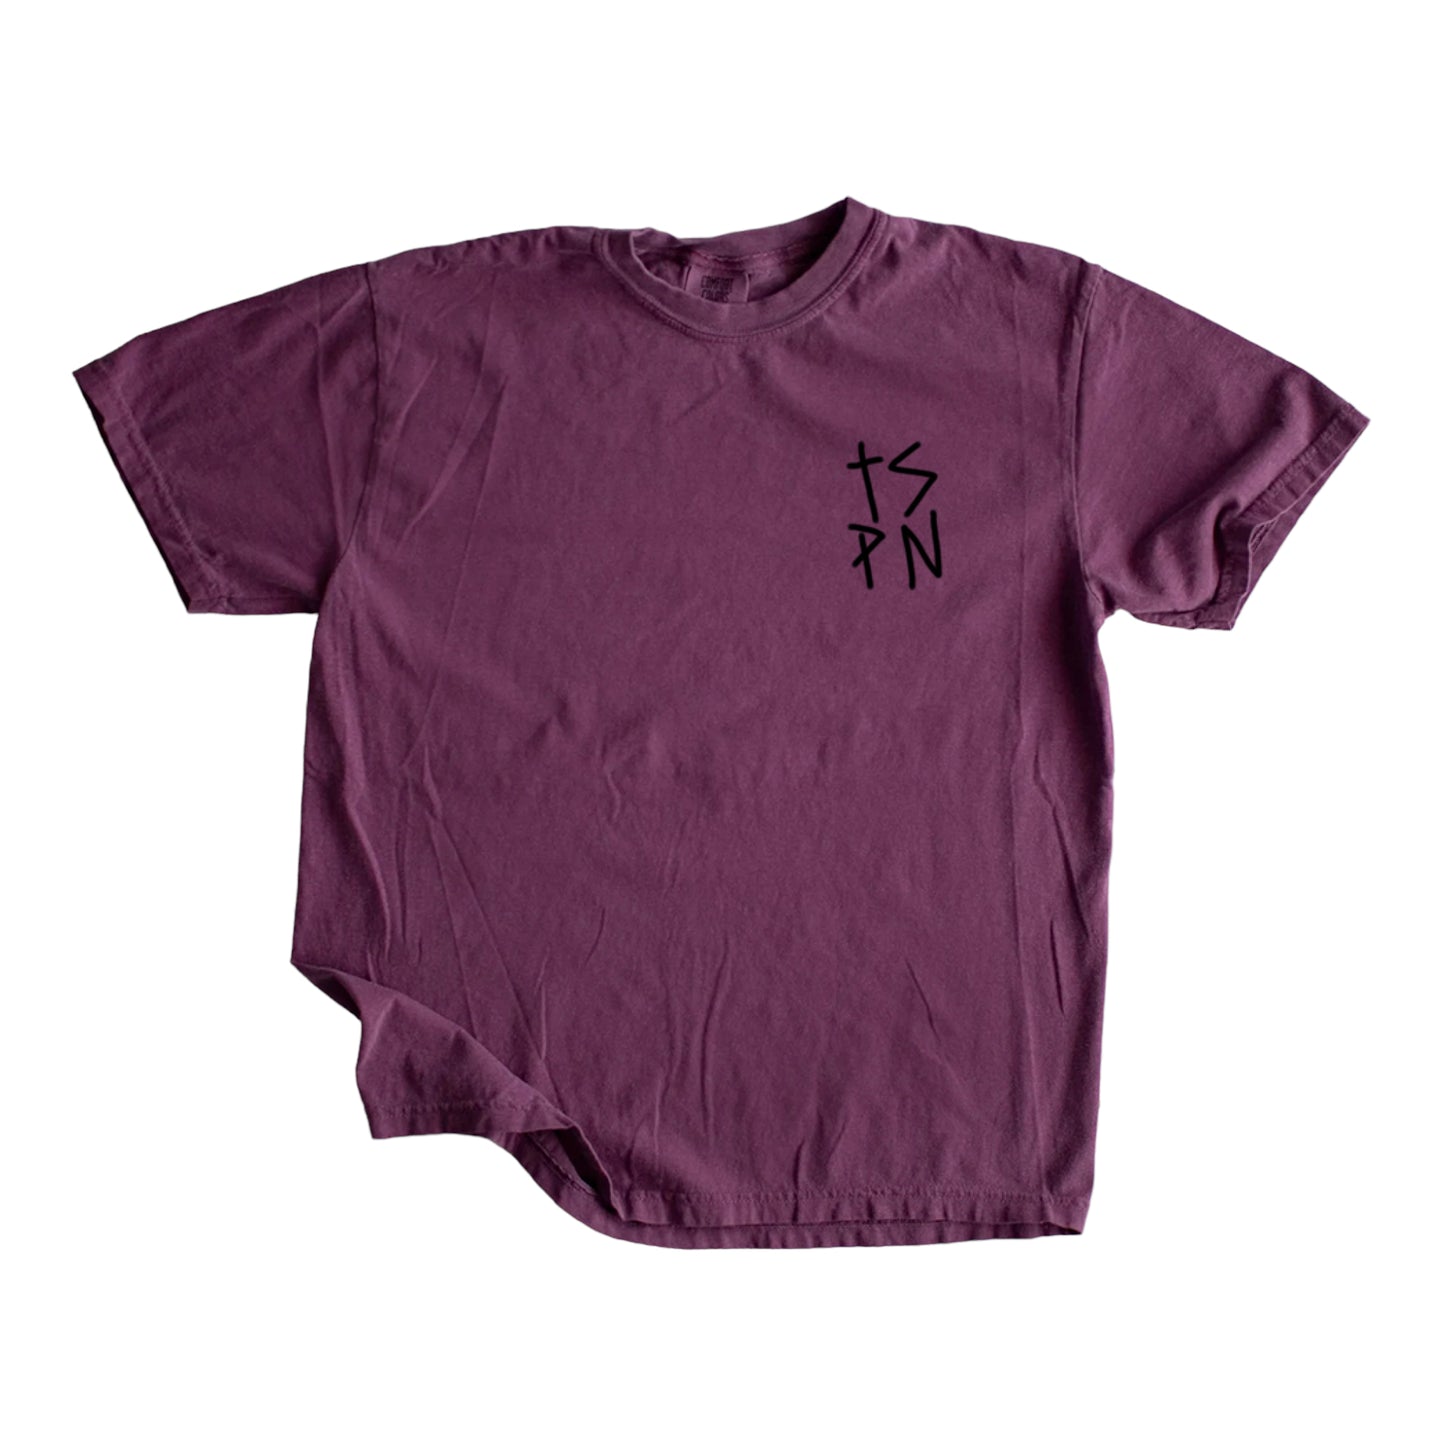 SB2 [ unisex washed tee ] Faded colors